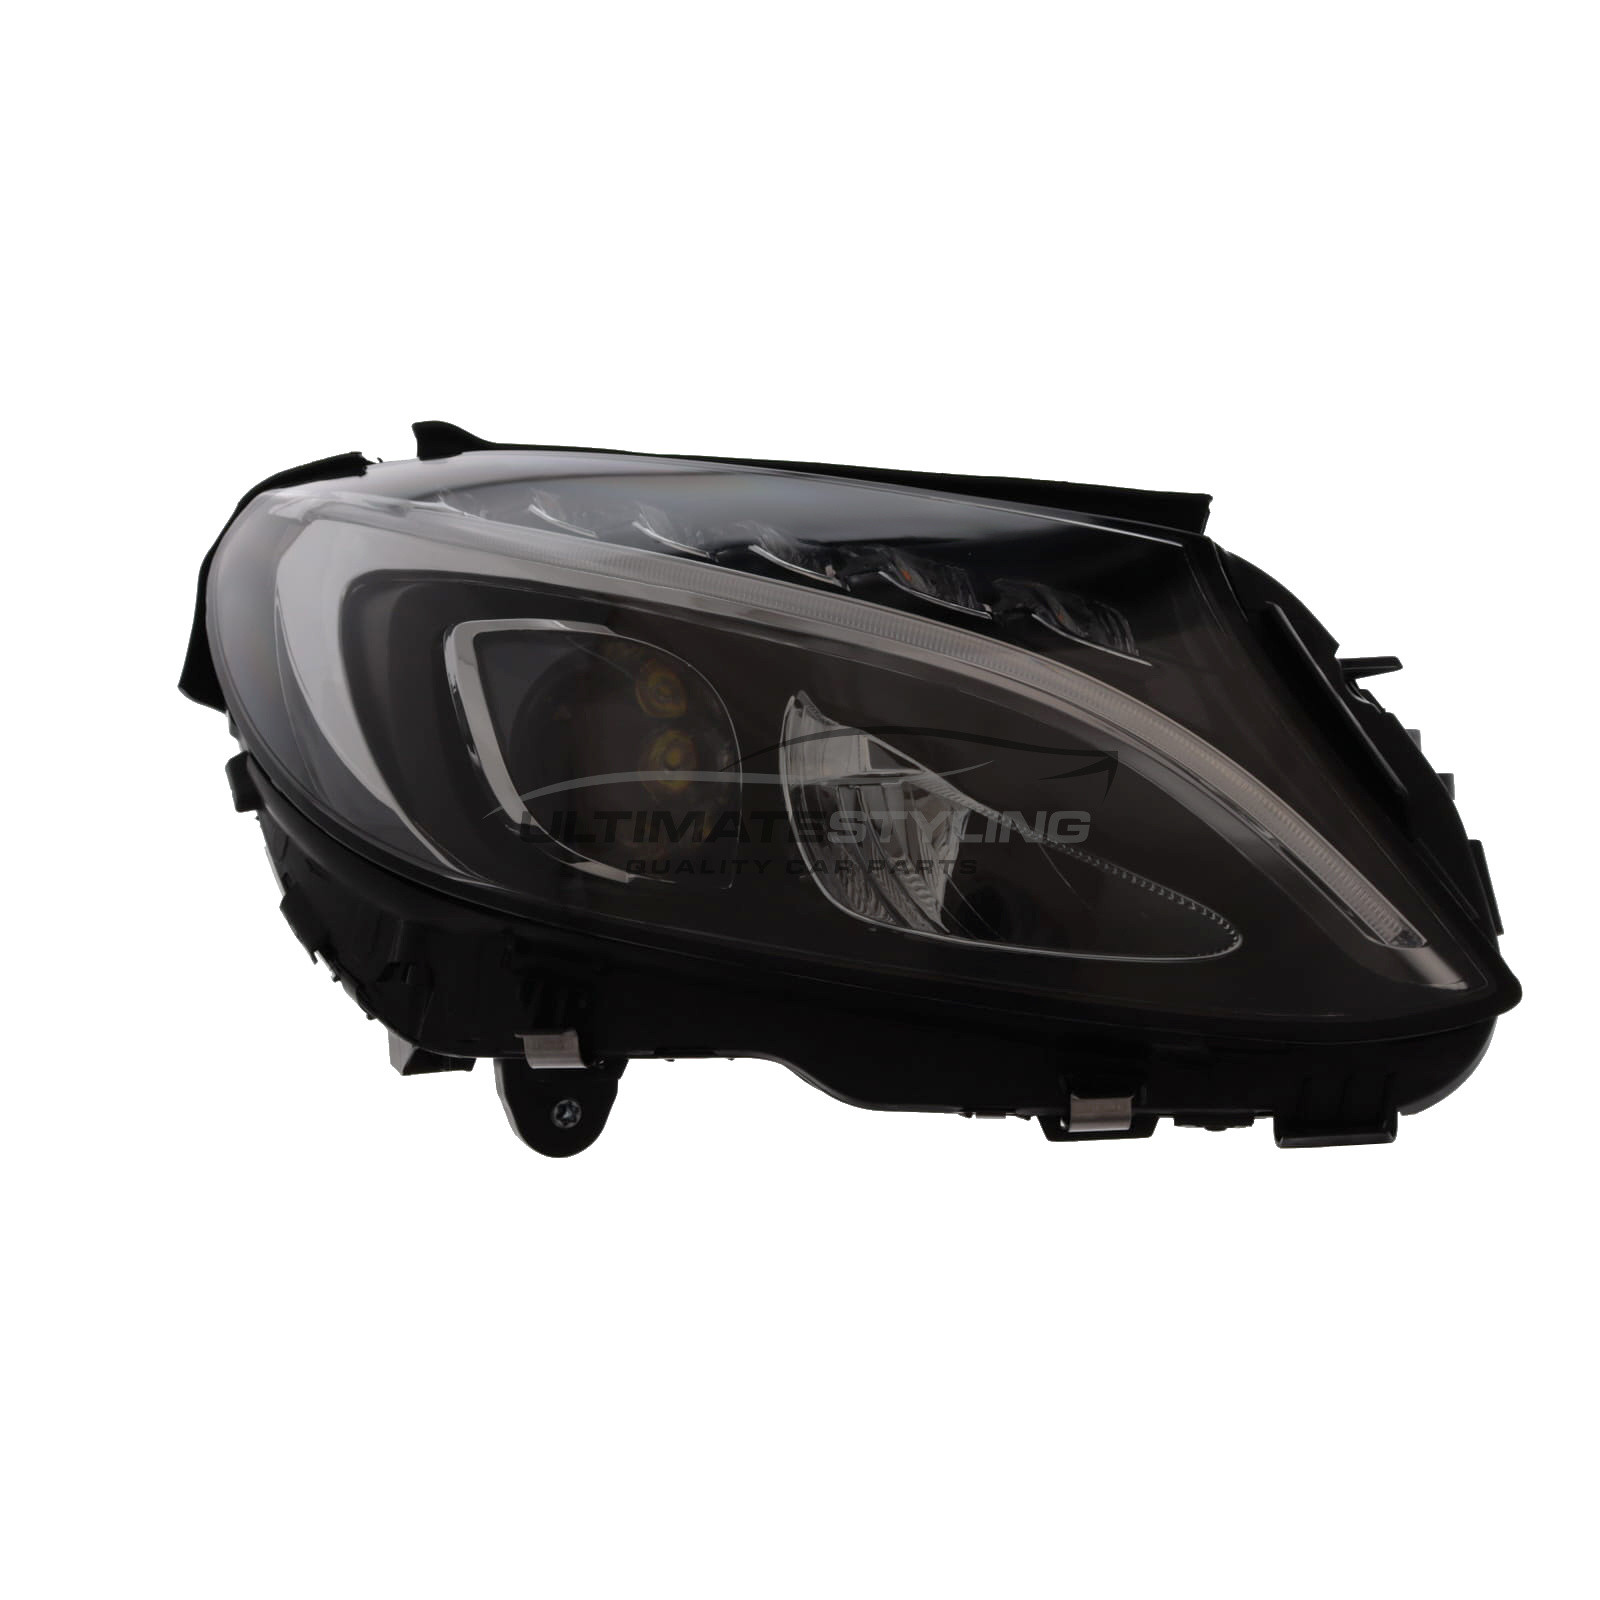 Mercedes Benz C Class Headlight / Headlamp - Drivers Side (RH) - LED With LED Daytime Running Lamp